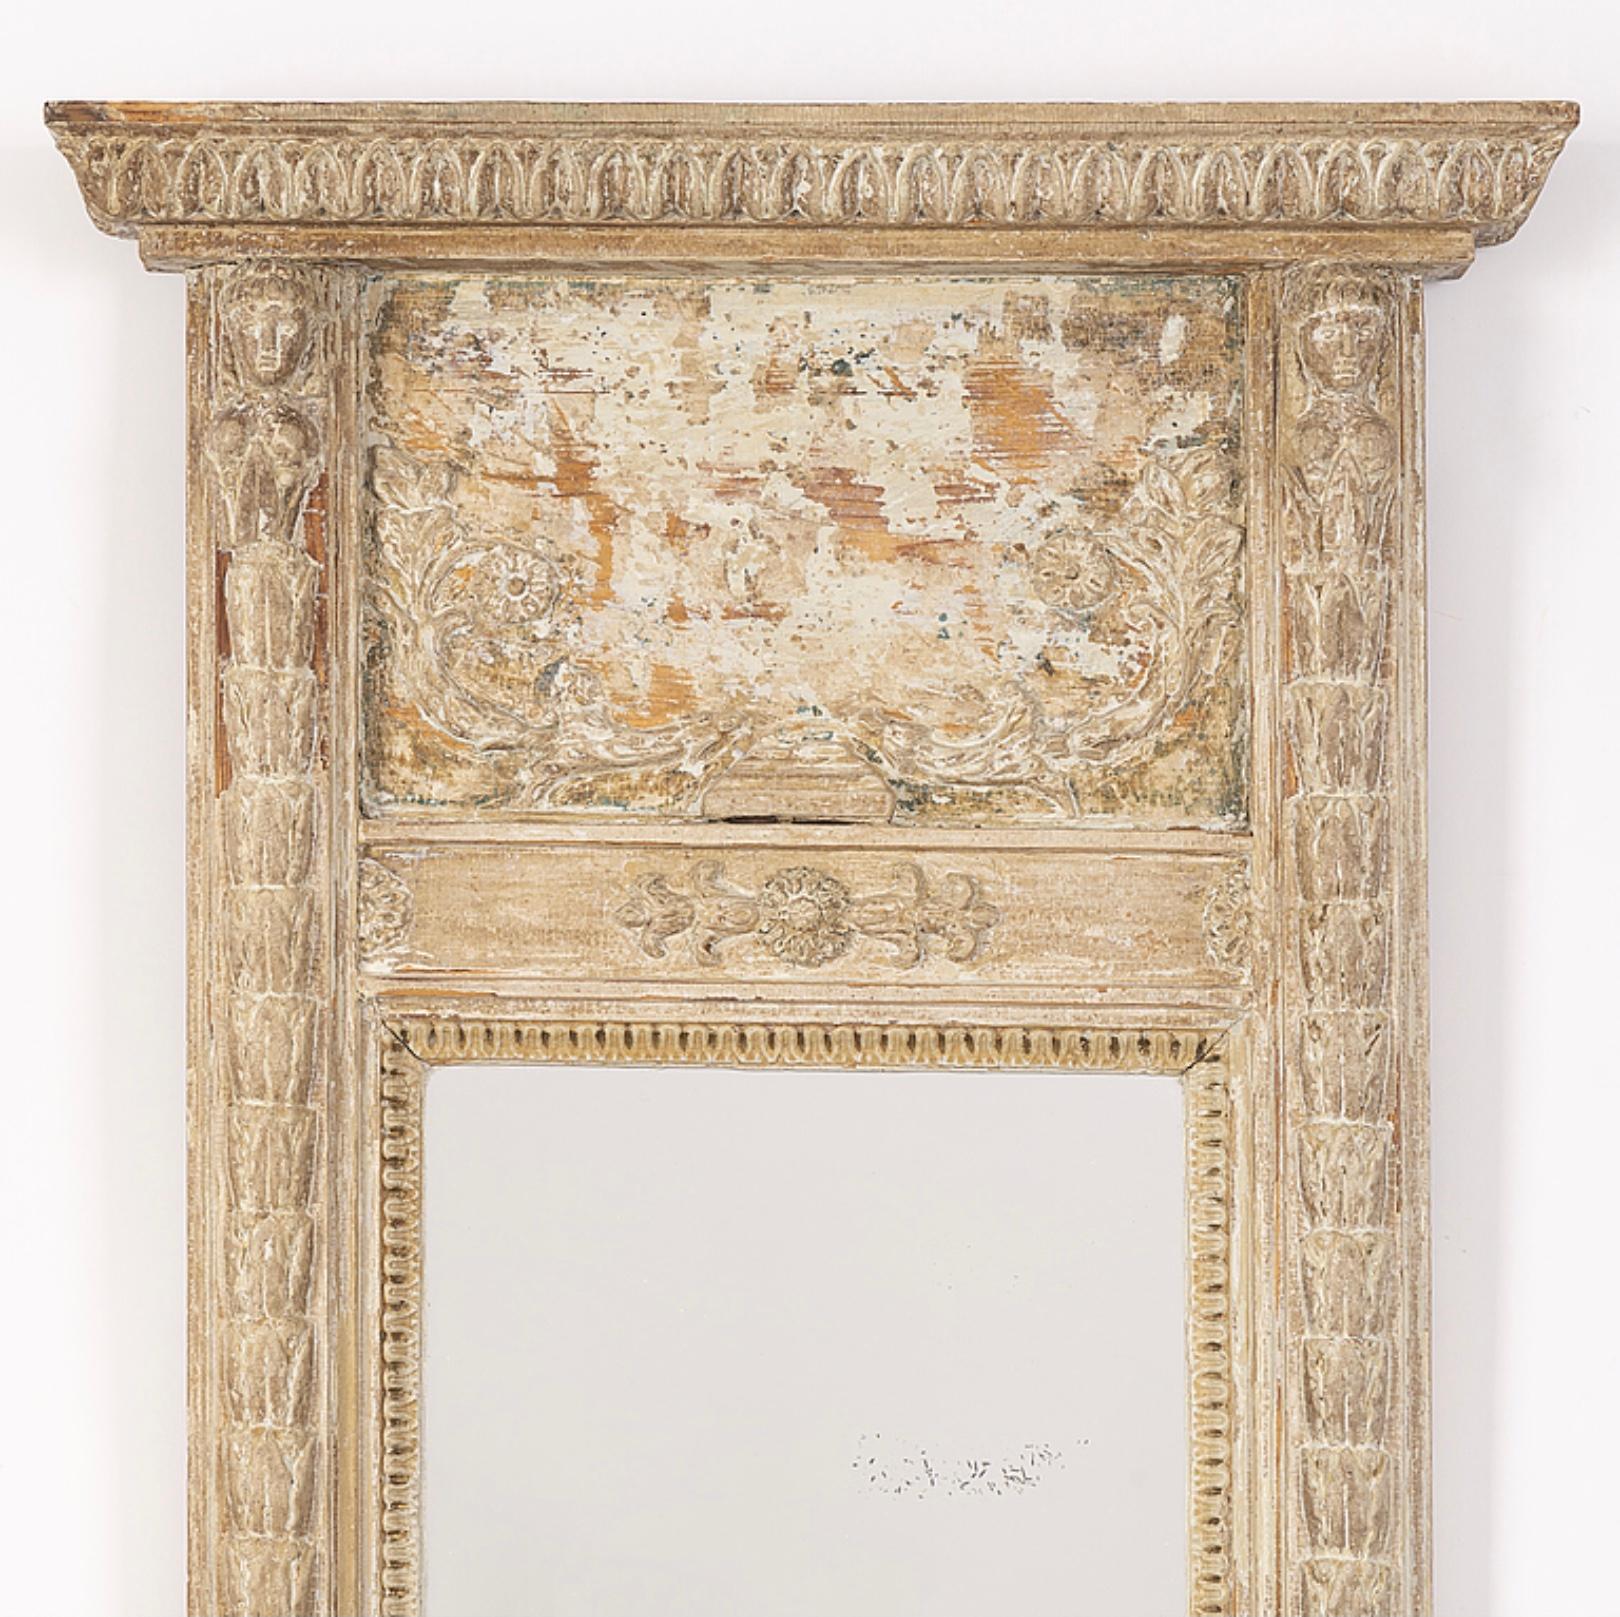 Wonderfully pale, this Swedish Empire style mirror circa 1820 has been stripped of its gilt, down to its pale soft tones beneath.
The mirrored glass has been replaced and some of its classic detail is missing which does not detract from its beauty.